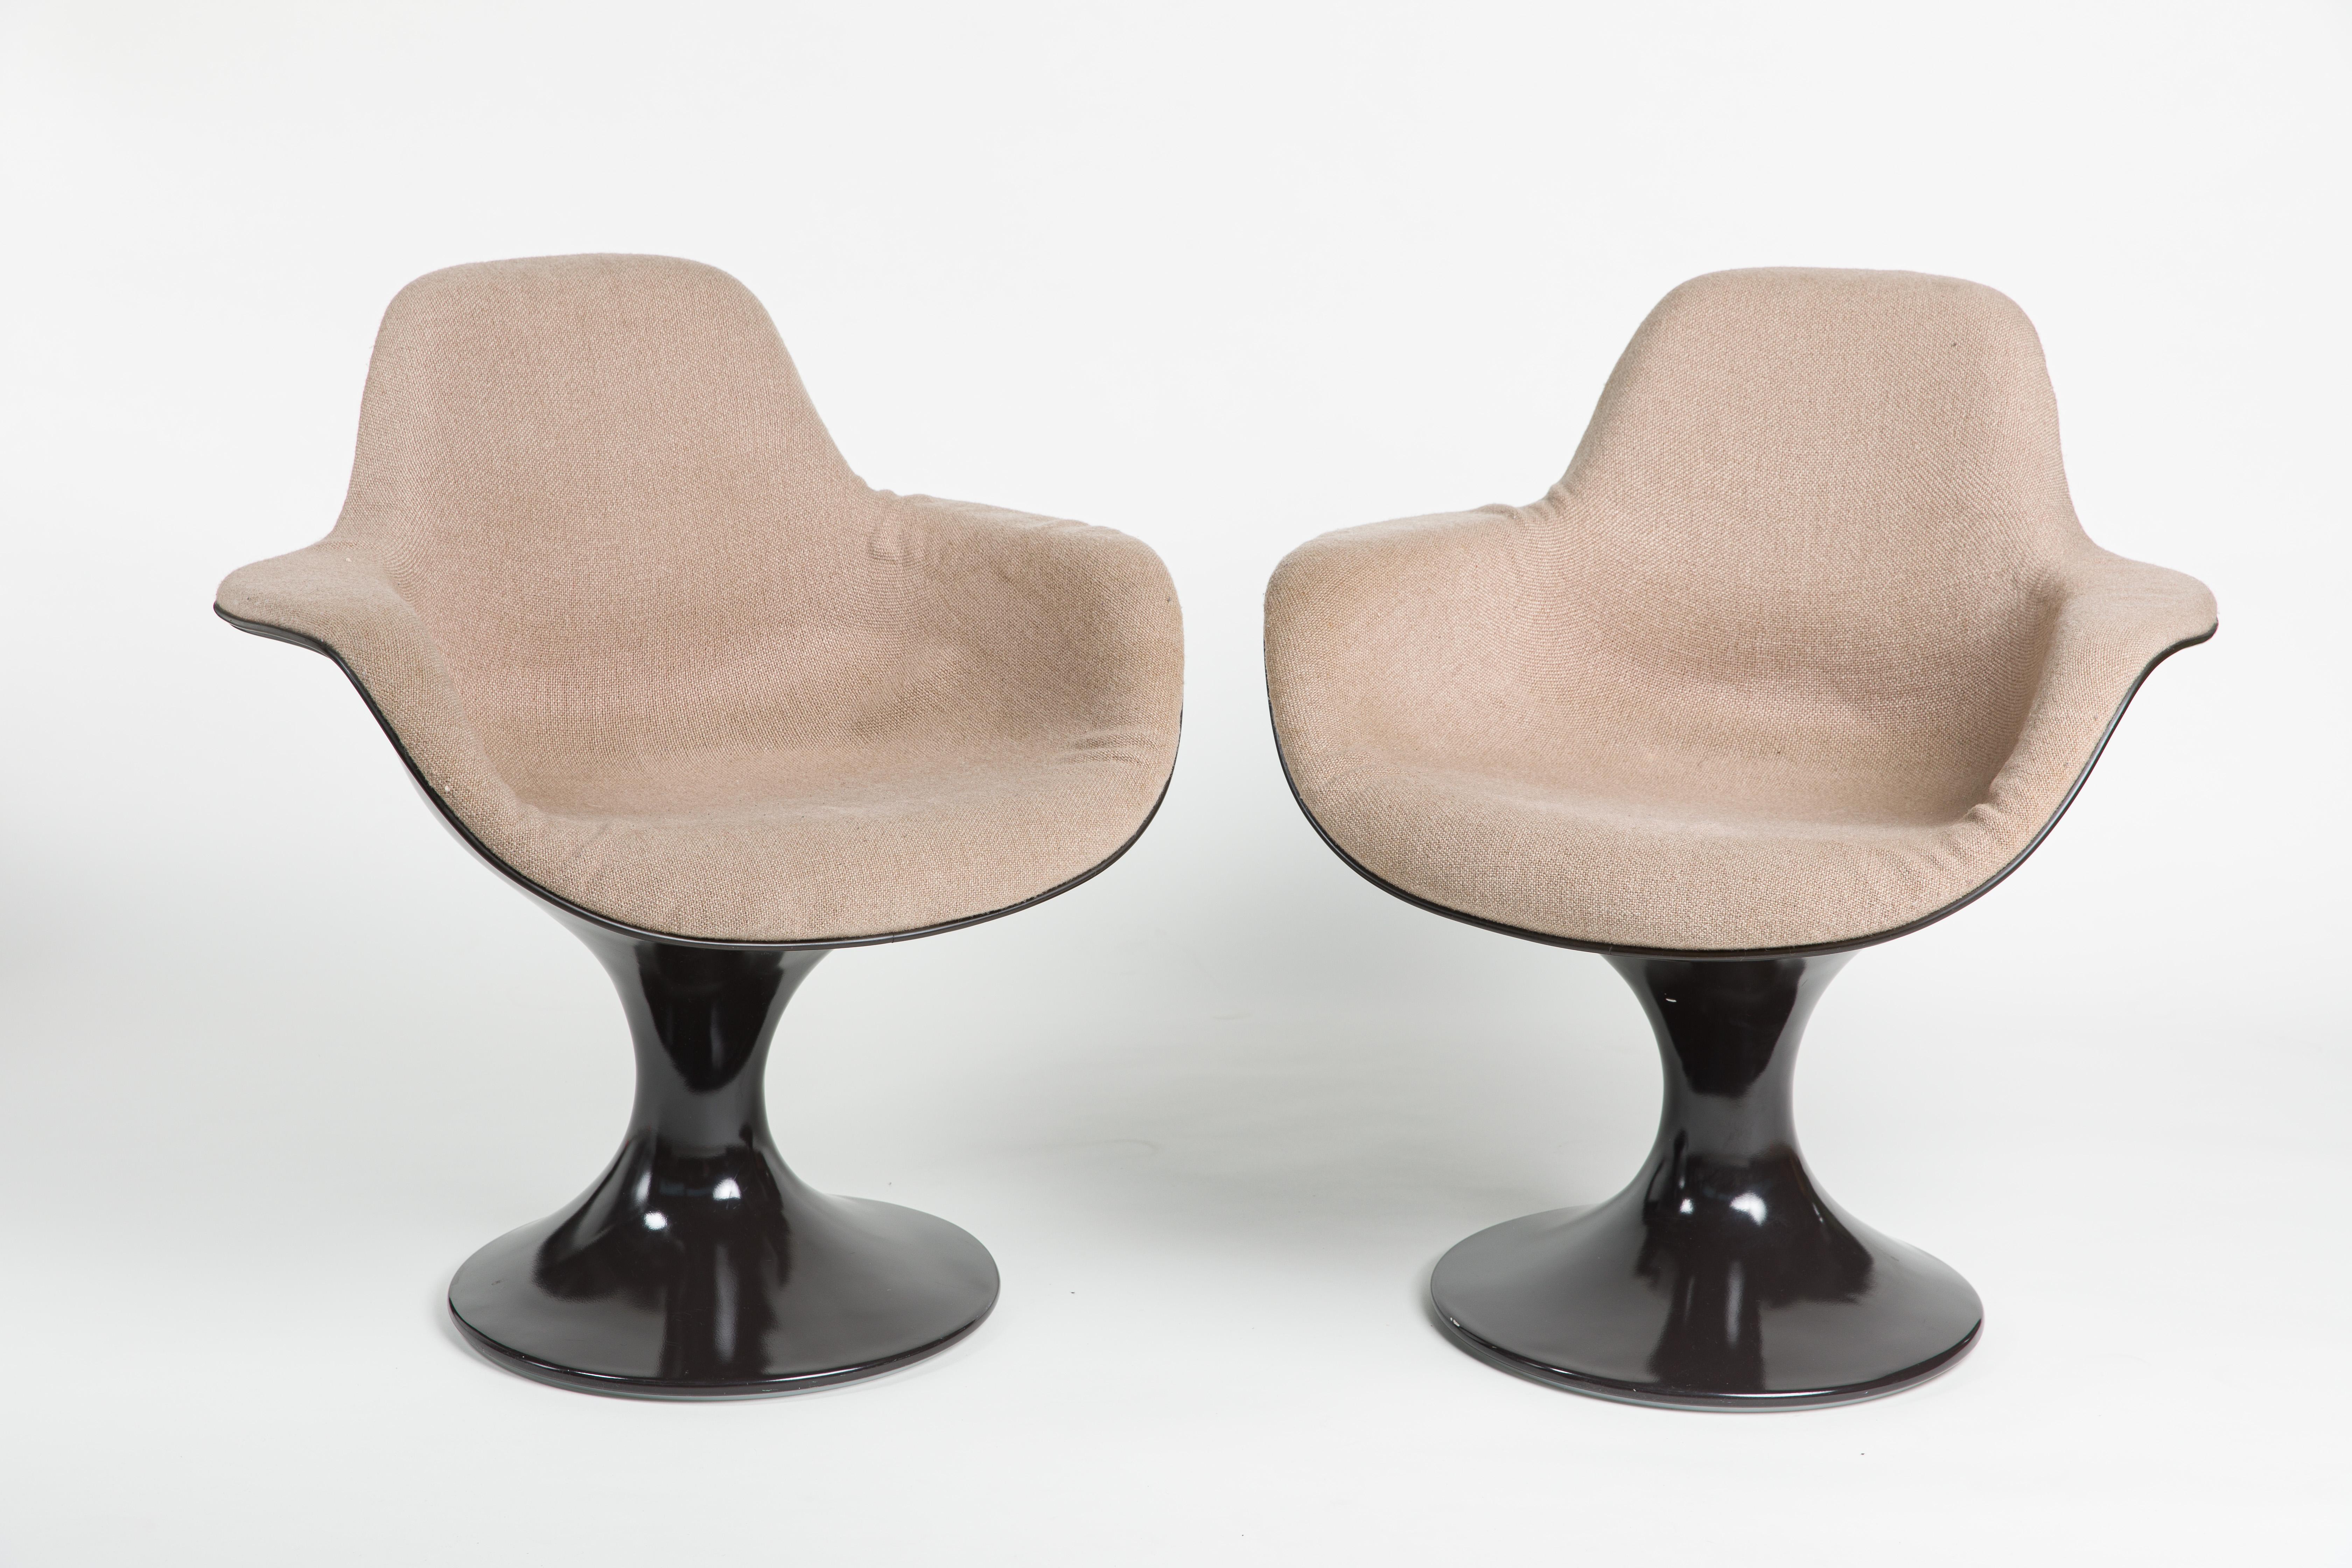 Pair of two armchairs, model Orbit, designed by Farner & Grunder for Herman Miller.
Design from the 1960s.
Swivel, one-piece shell construction made of dark brown lacquered plastic, cover in beige wool fabric.